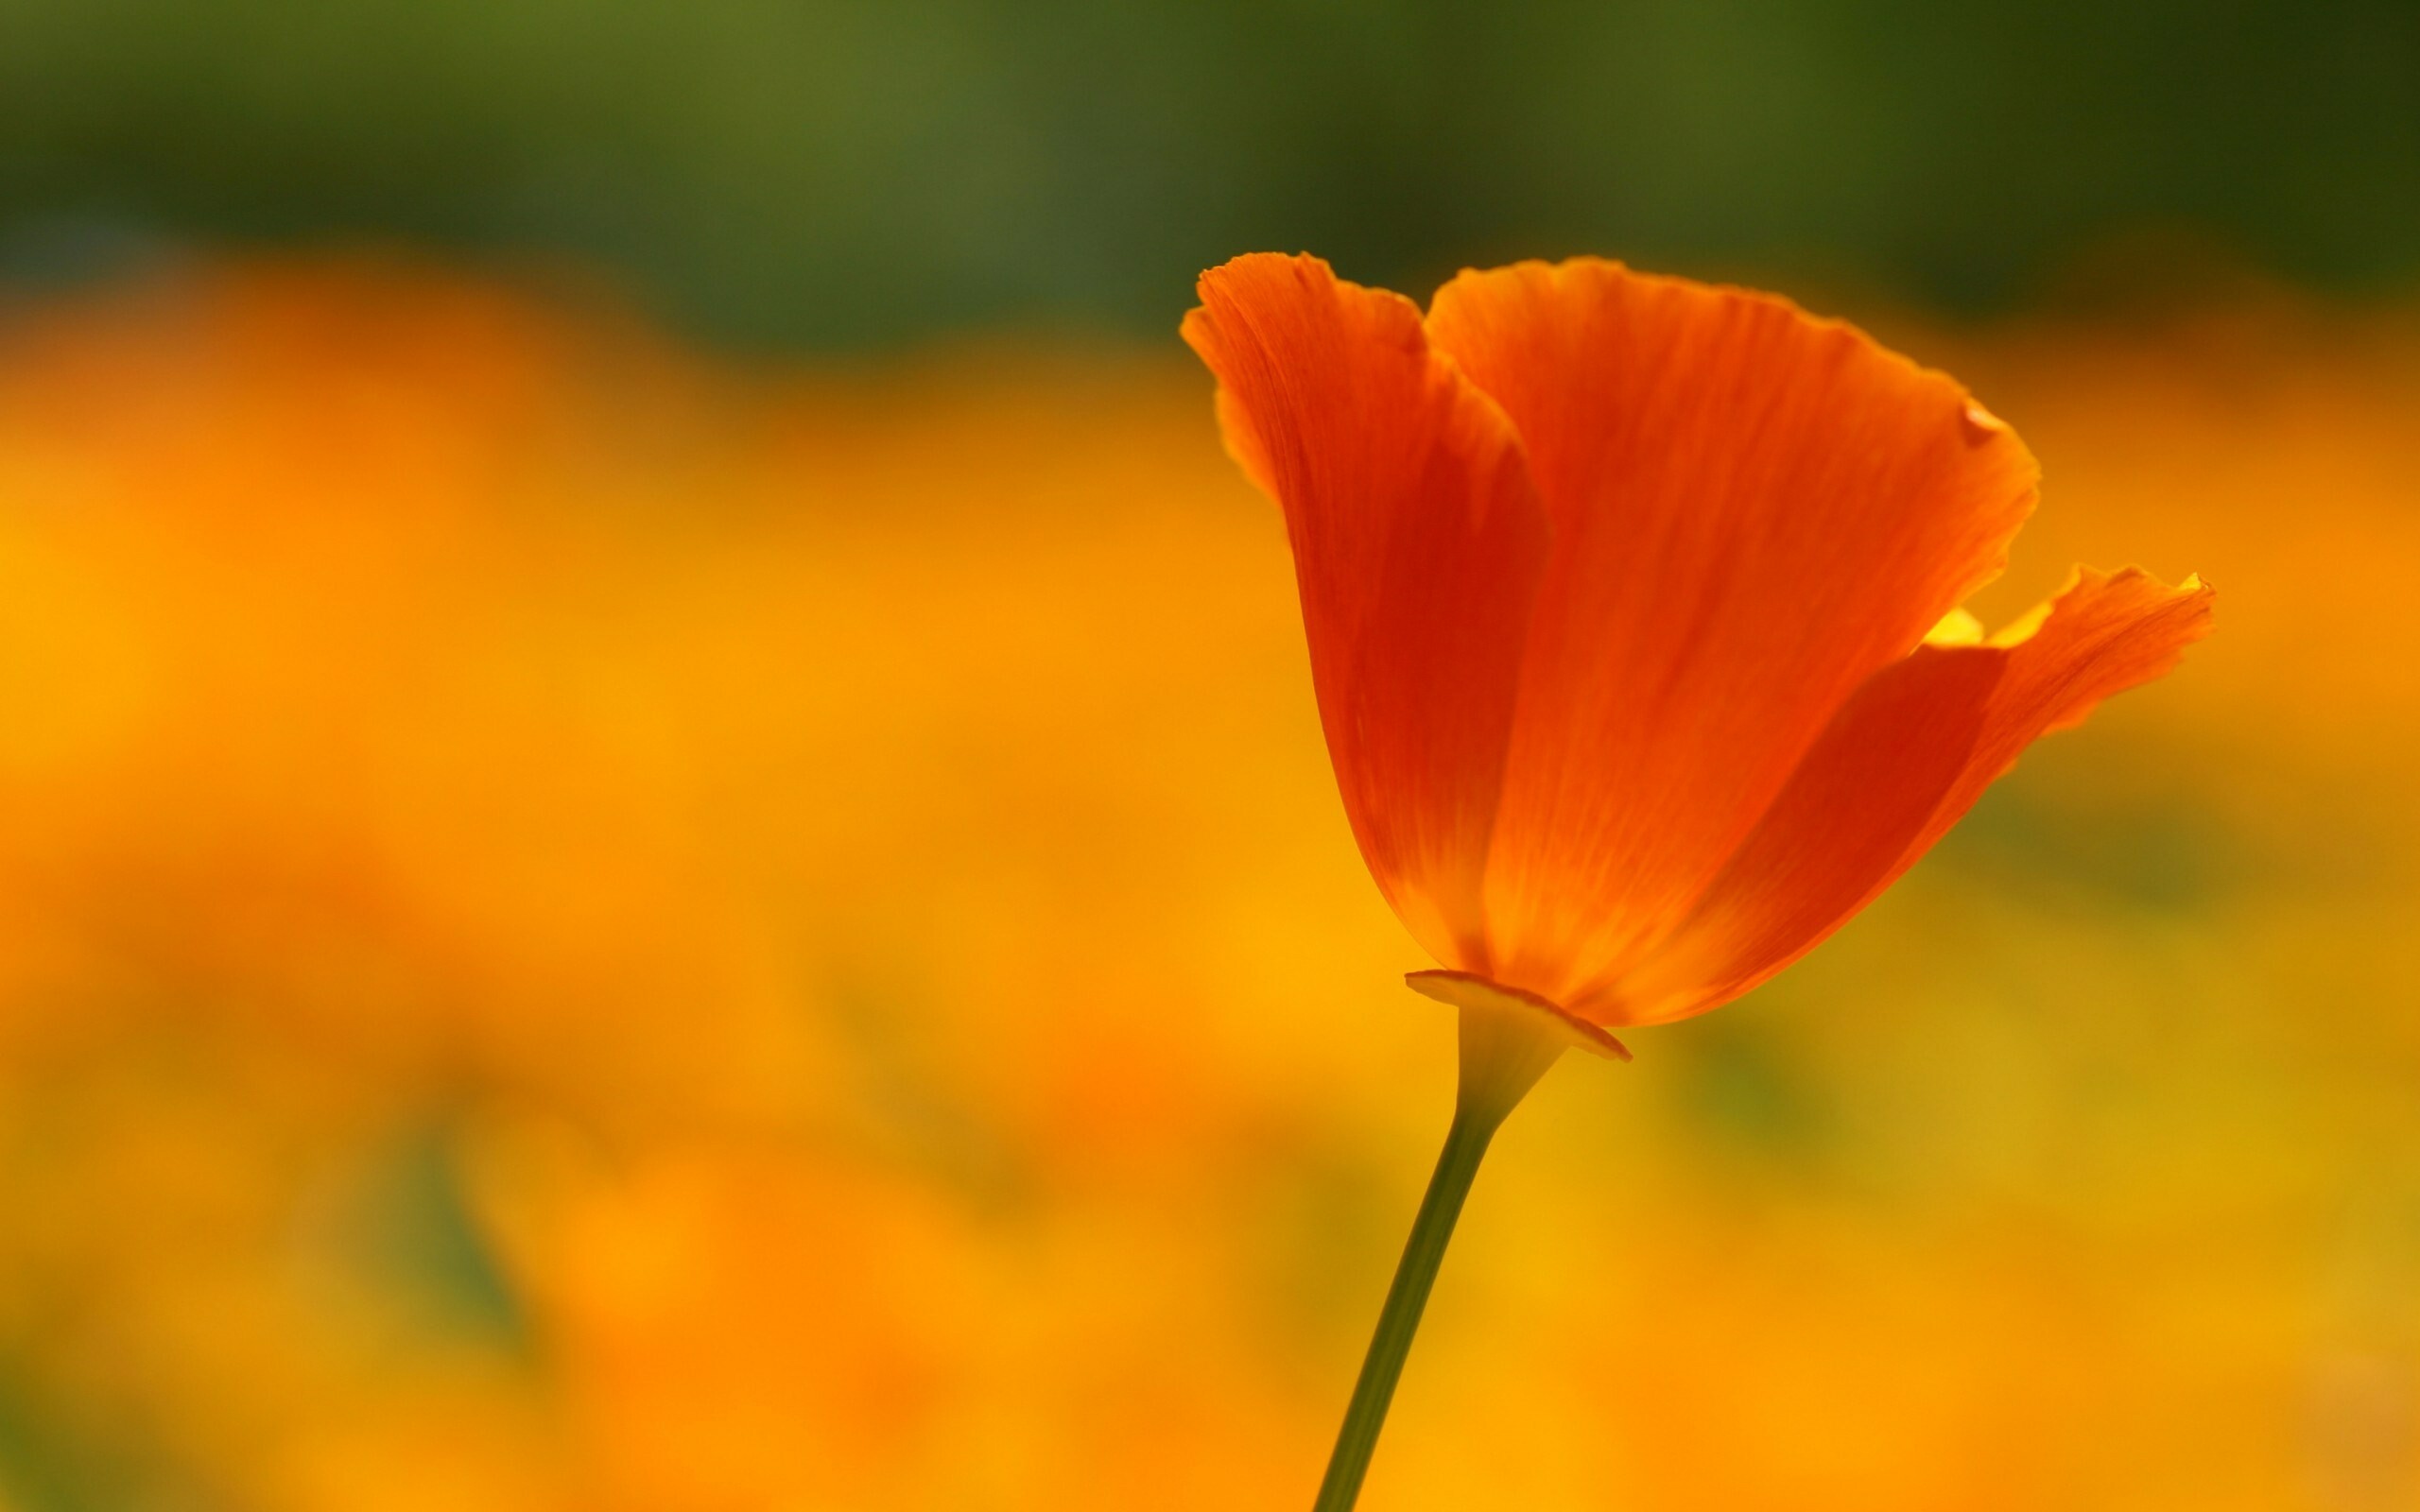 Poppy Flower: The two sepals usually drop off as the petals unfold, Flowering plant. 2560x1600 HD Background.